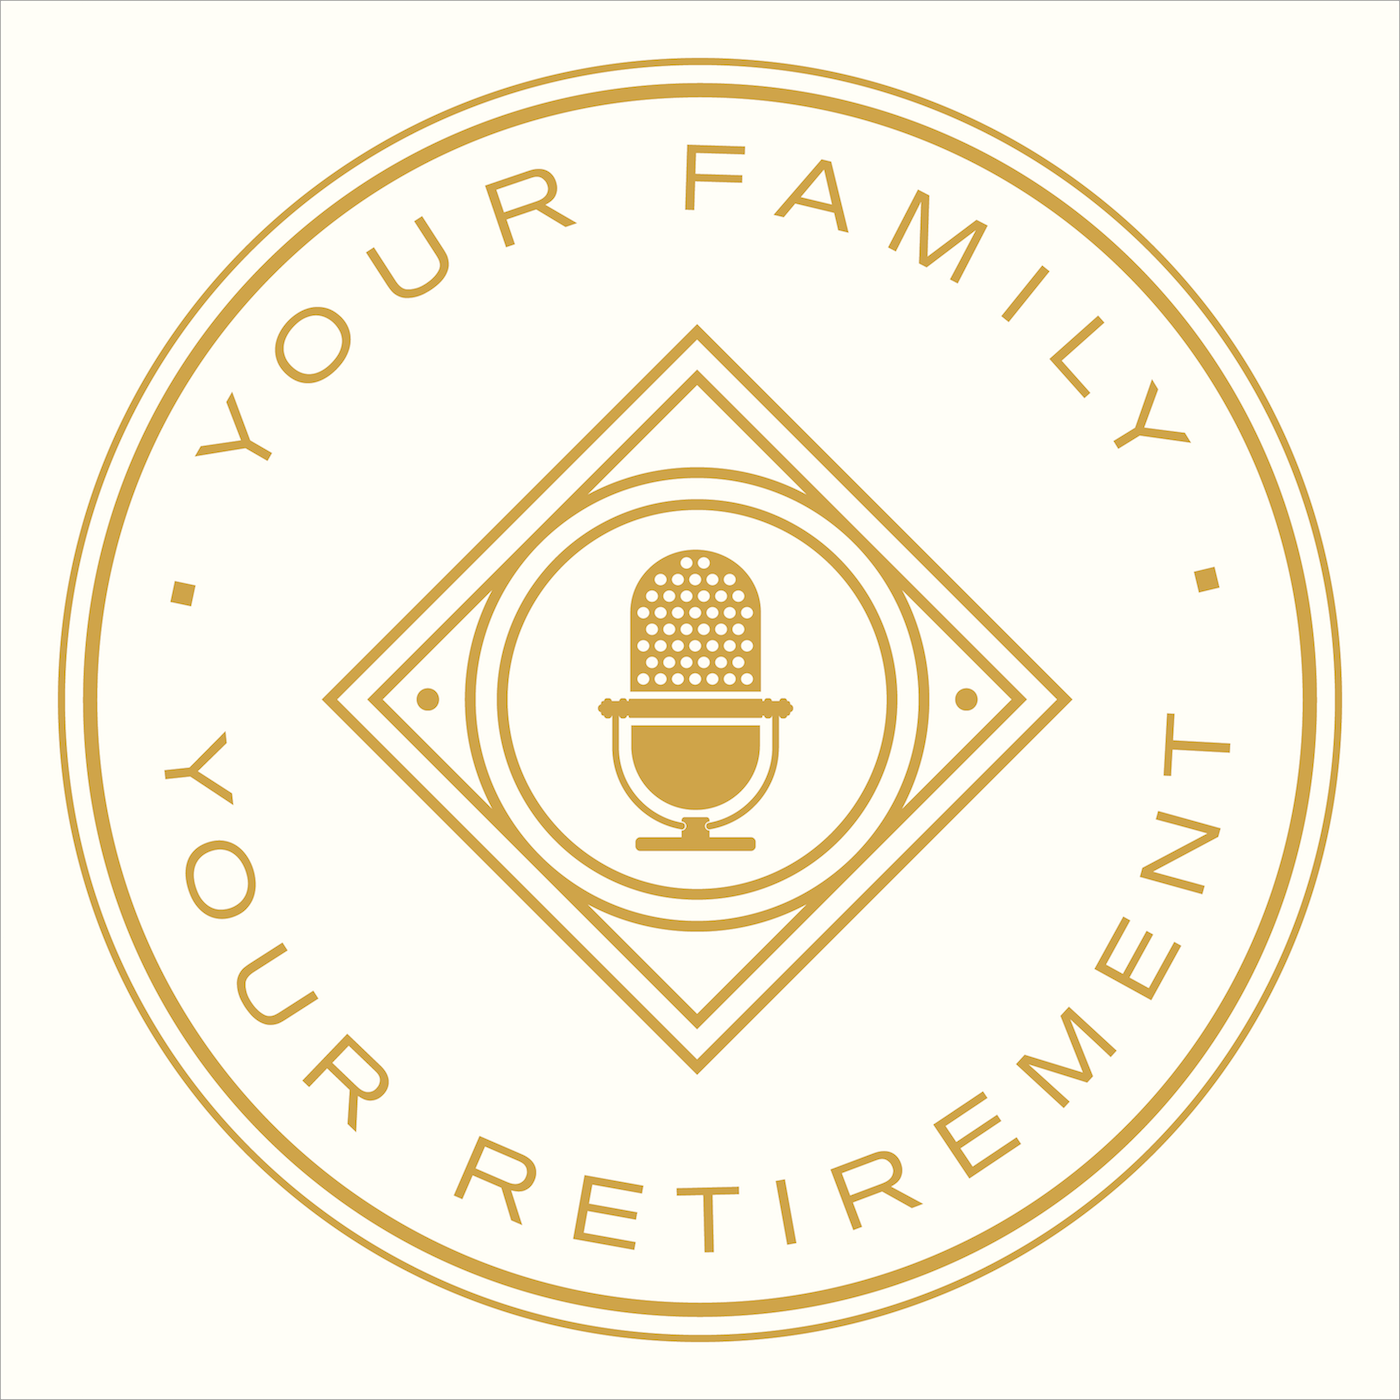 Should retirees use fixed income programs?